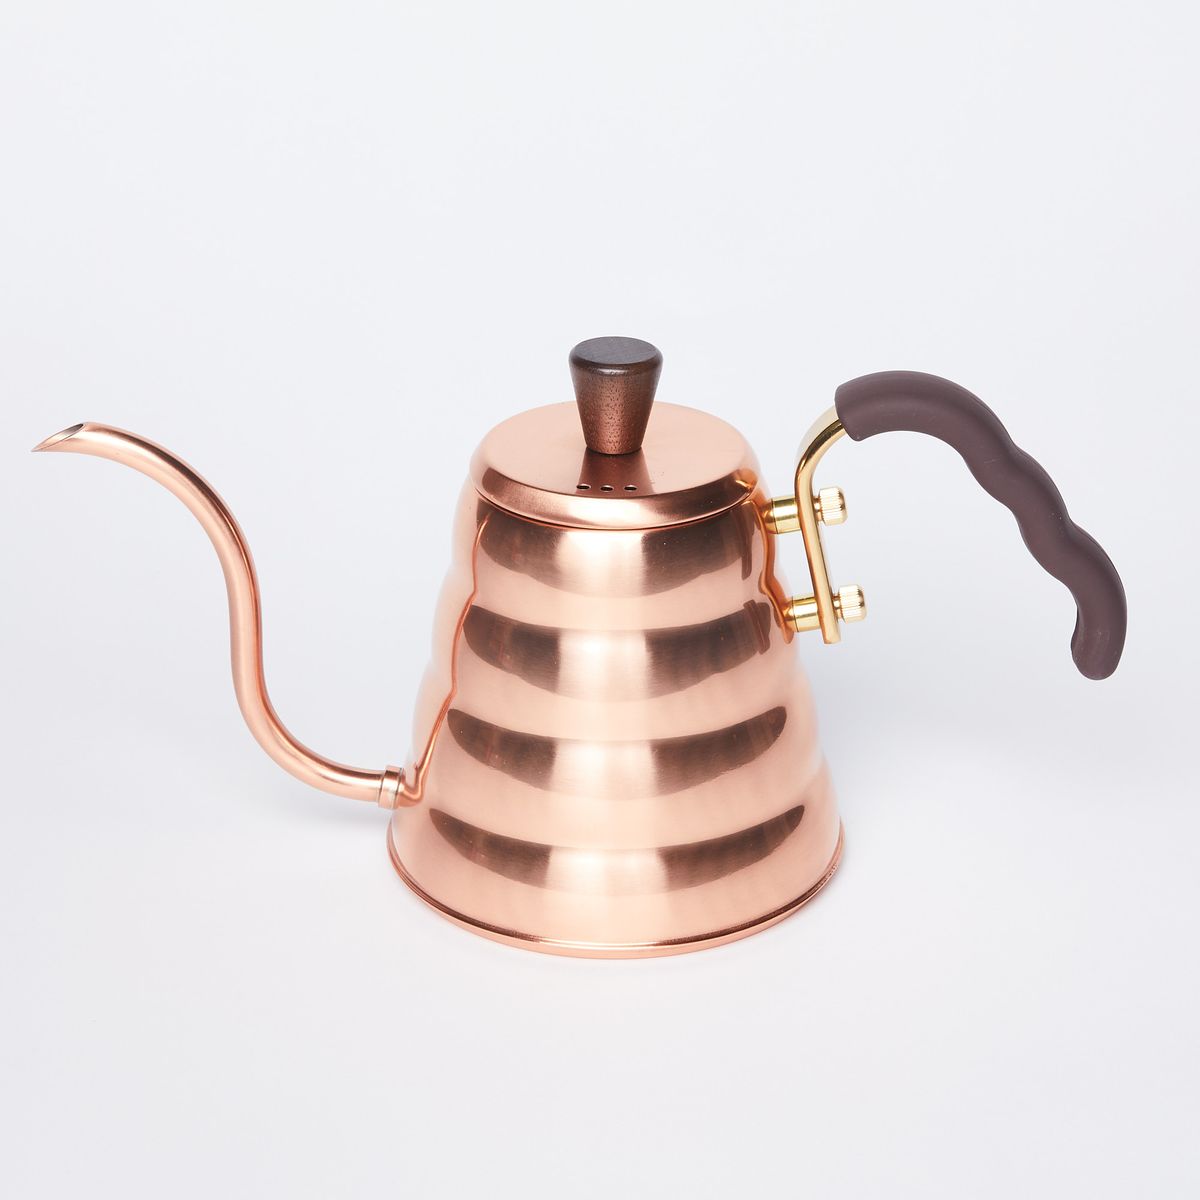 Copper kettle with tapered round base and curvy slim spout with black rubber covered handle